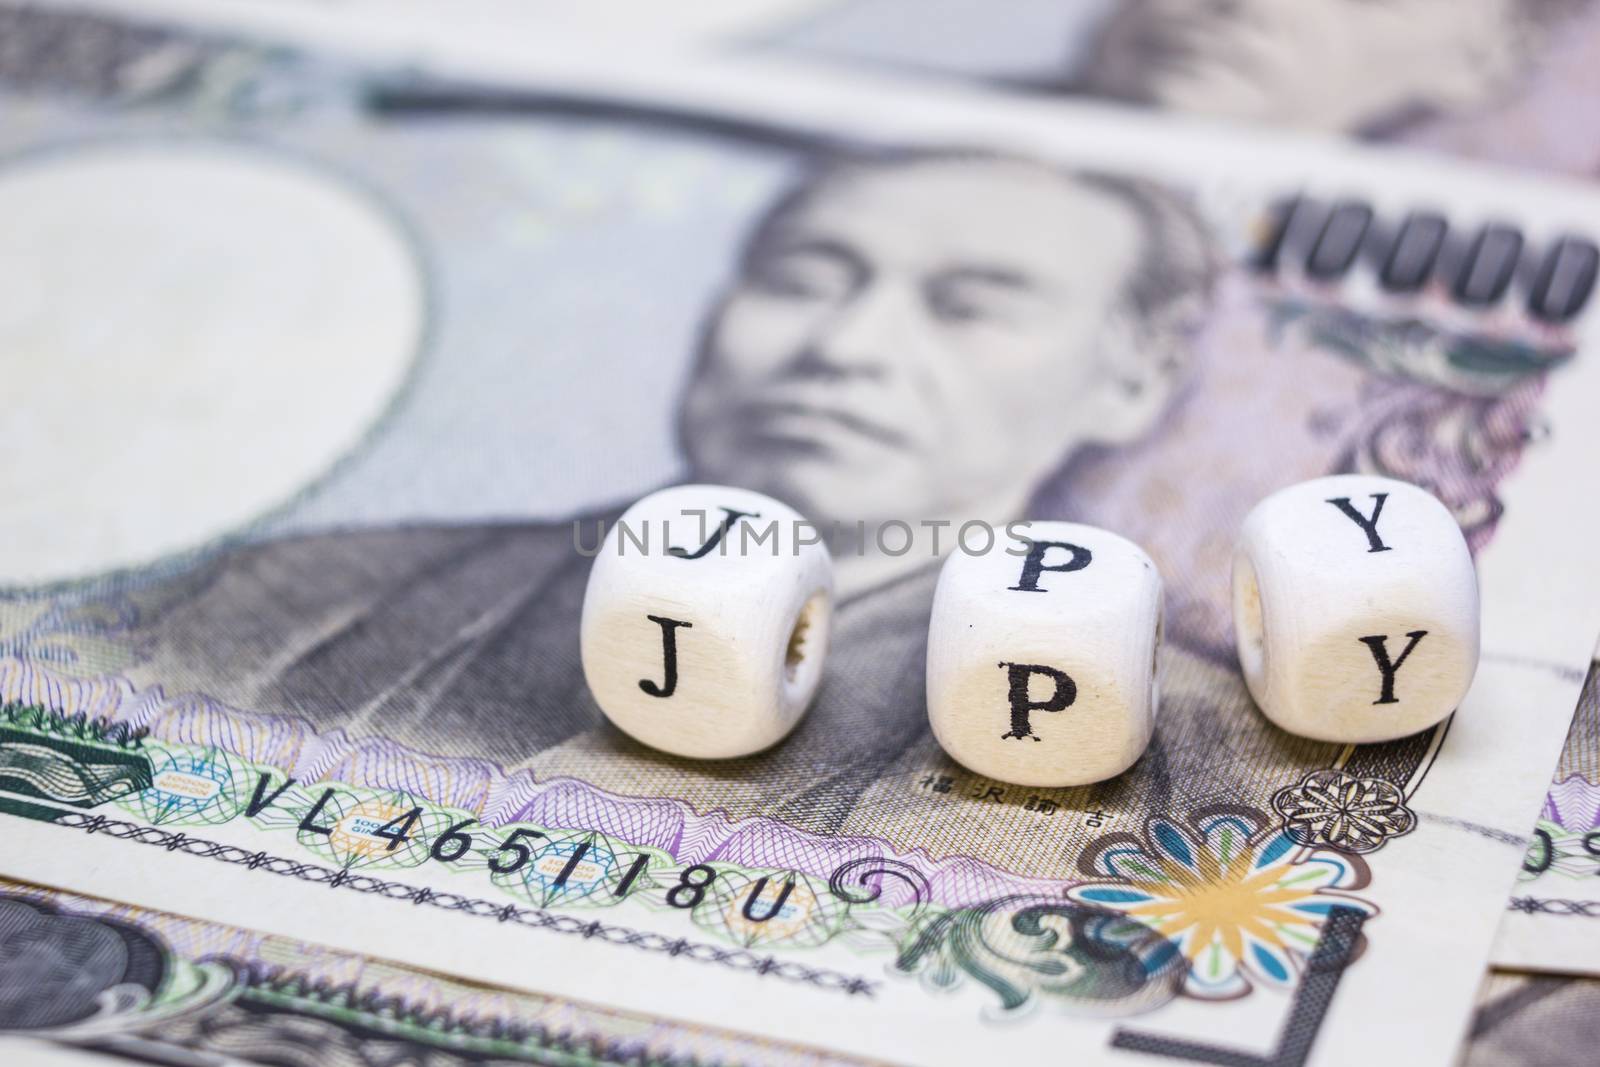 close-up of wooden cube with text "J P Y" on banknote YEN for bu by rakoptonLPN